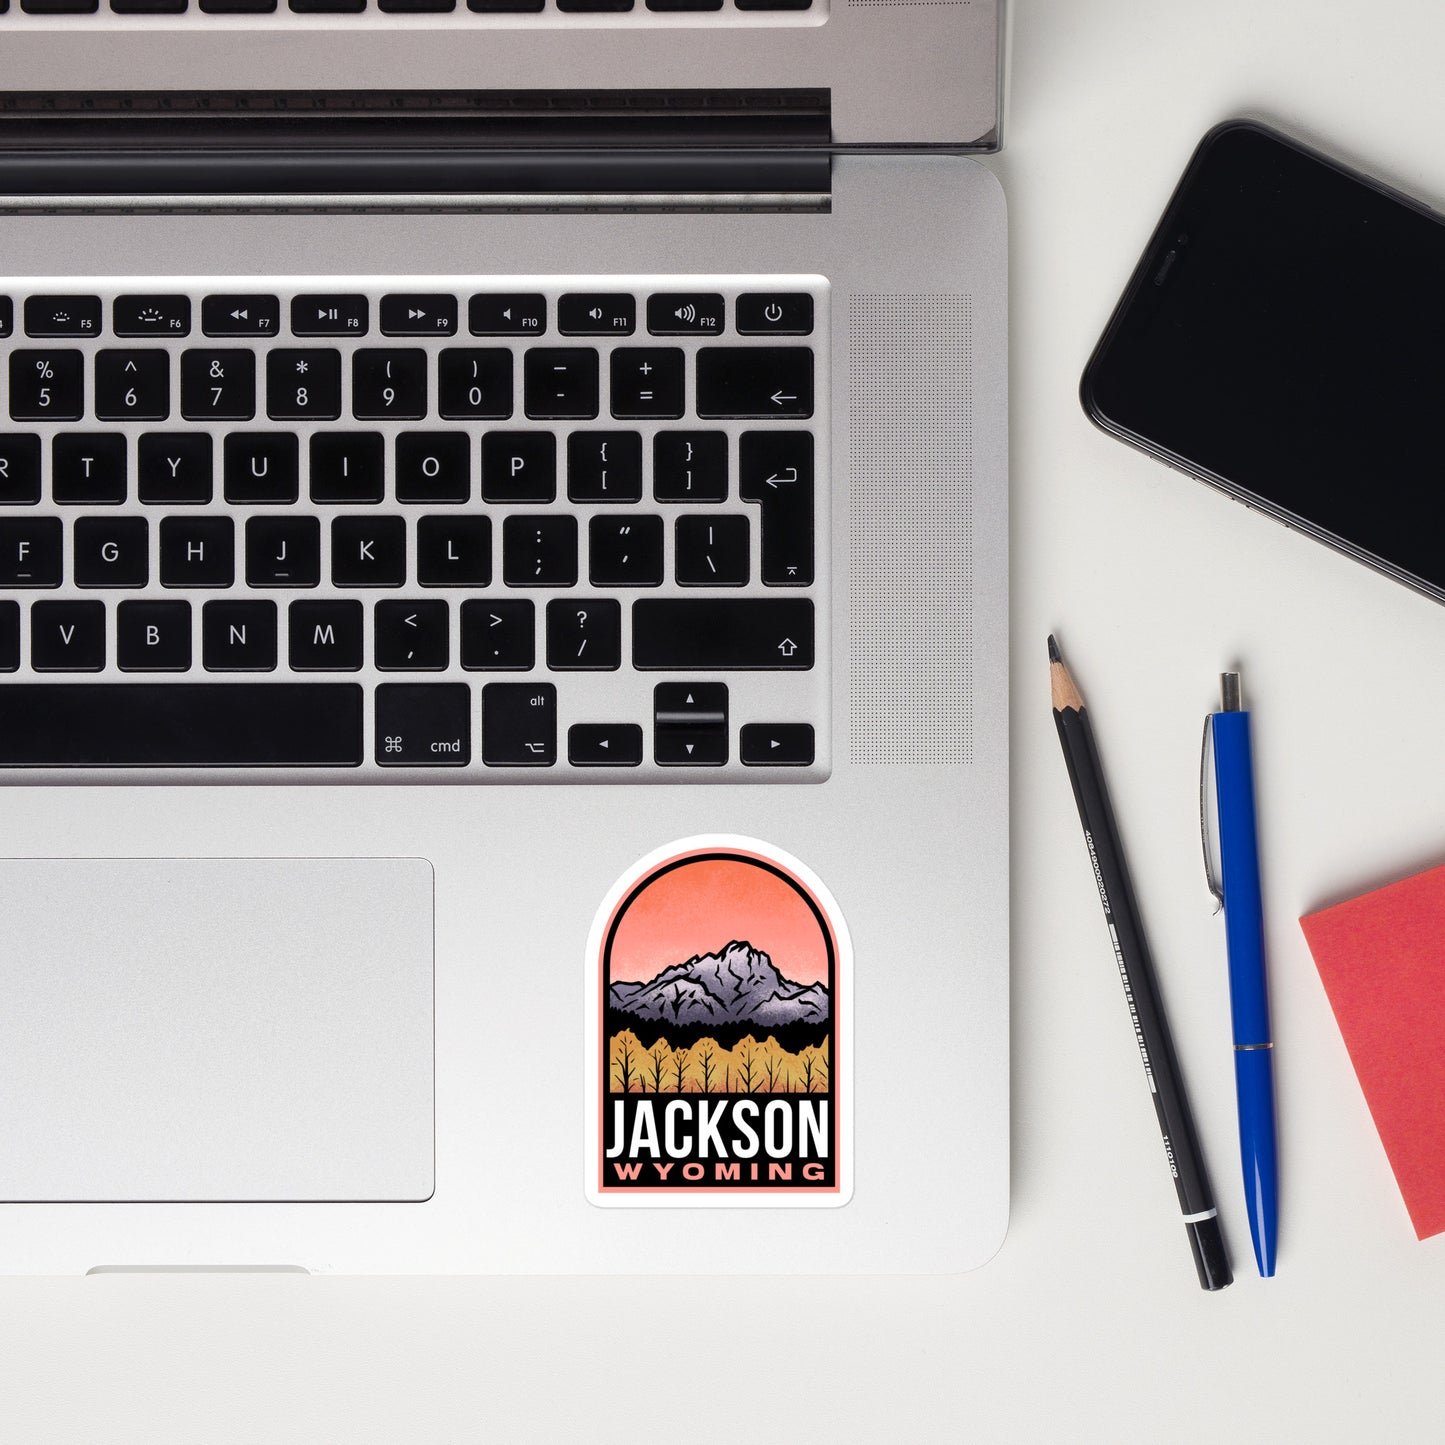 A sticker of Jackson Wyoming on a laptop